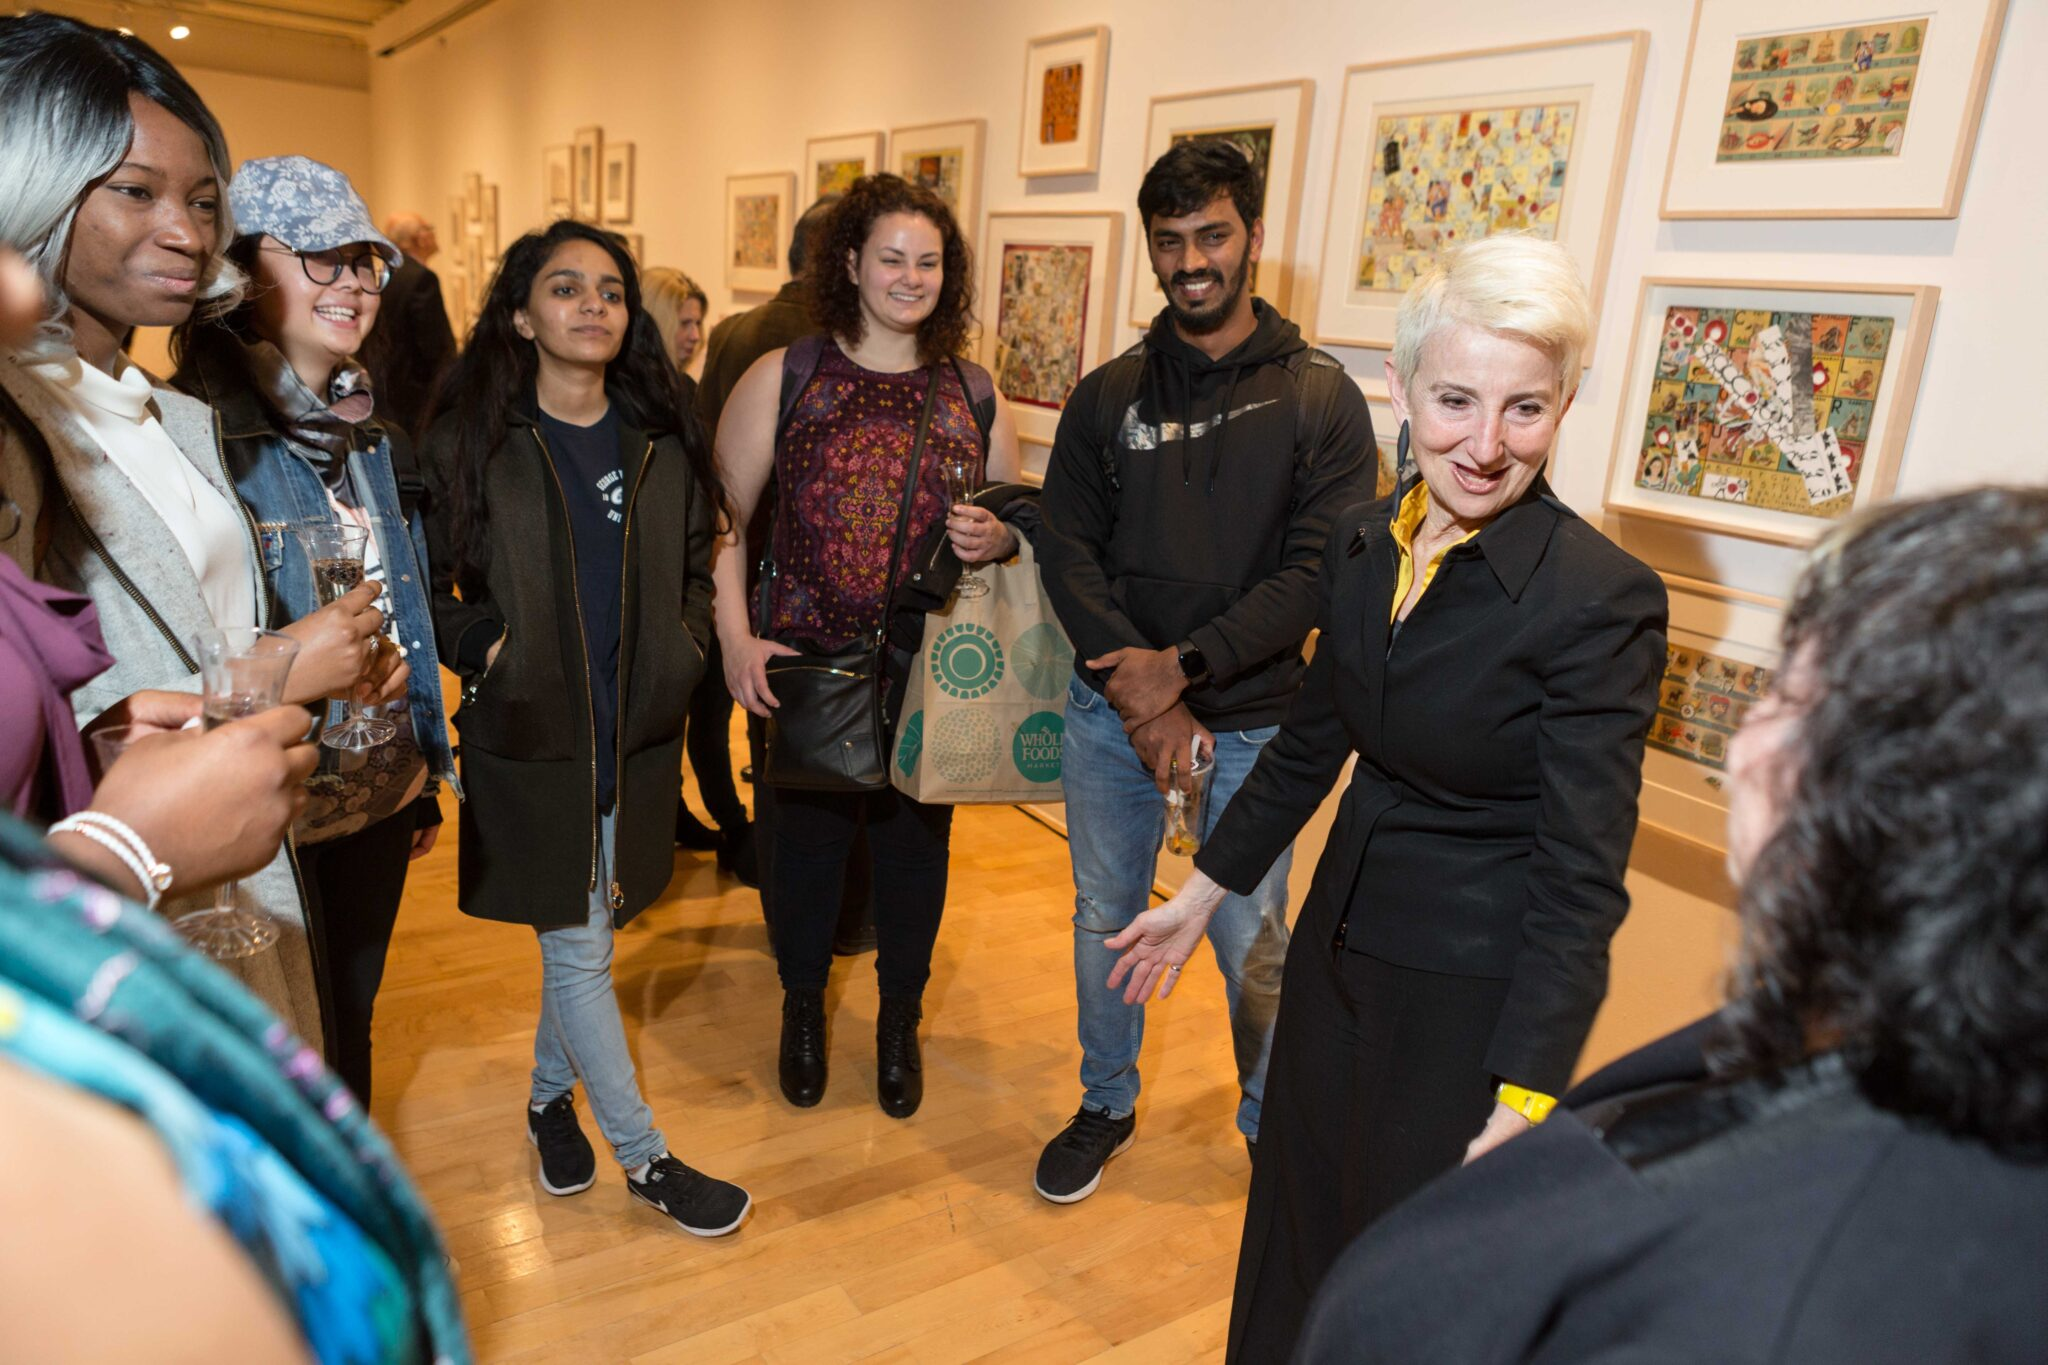 A group of people stand in an art gallery, engaged in conversation. The group consists of diverse individuals, including Pratt President Frances Bronet leading the discussion. The gallery walls are adorned with framed artworks featuring colorful illustrations. Some people in the group are holding drinks, and one person carries a tote bag. The atmosphere is lively and interactive, with everyone appearing interested and engaged in the conversation.